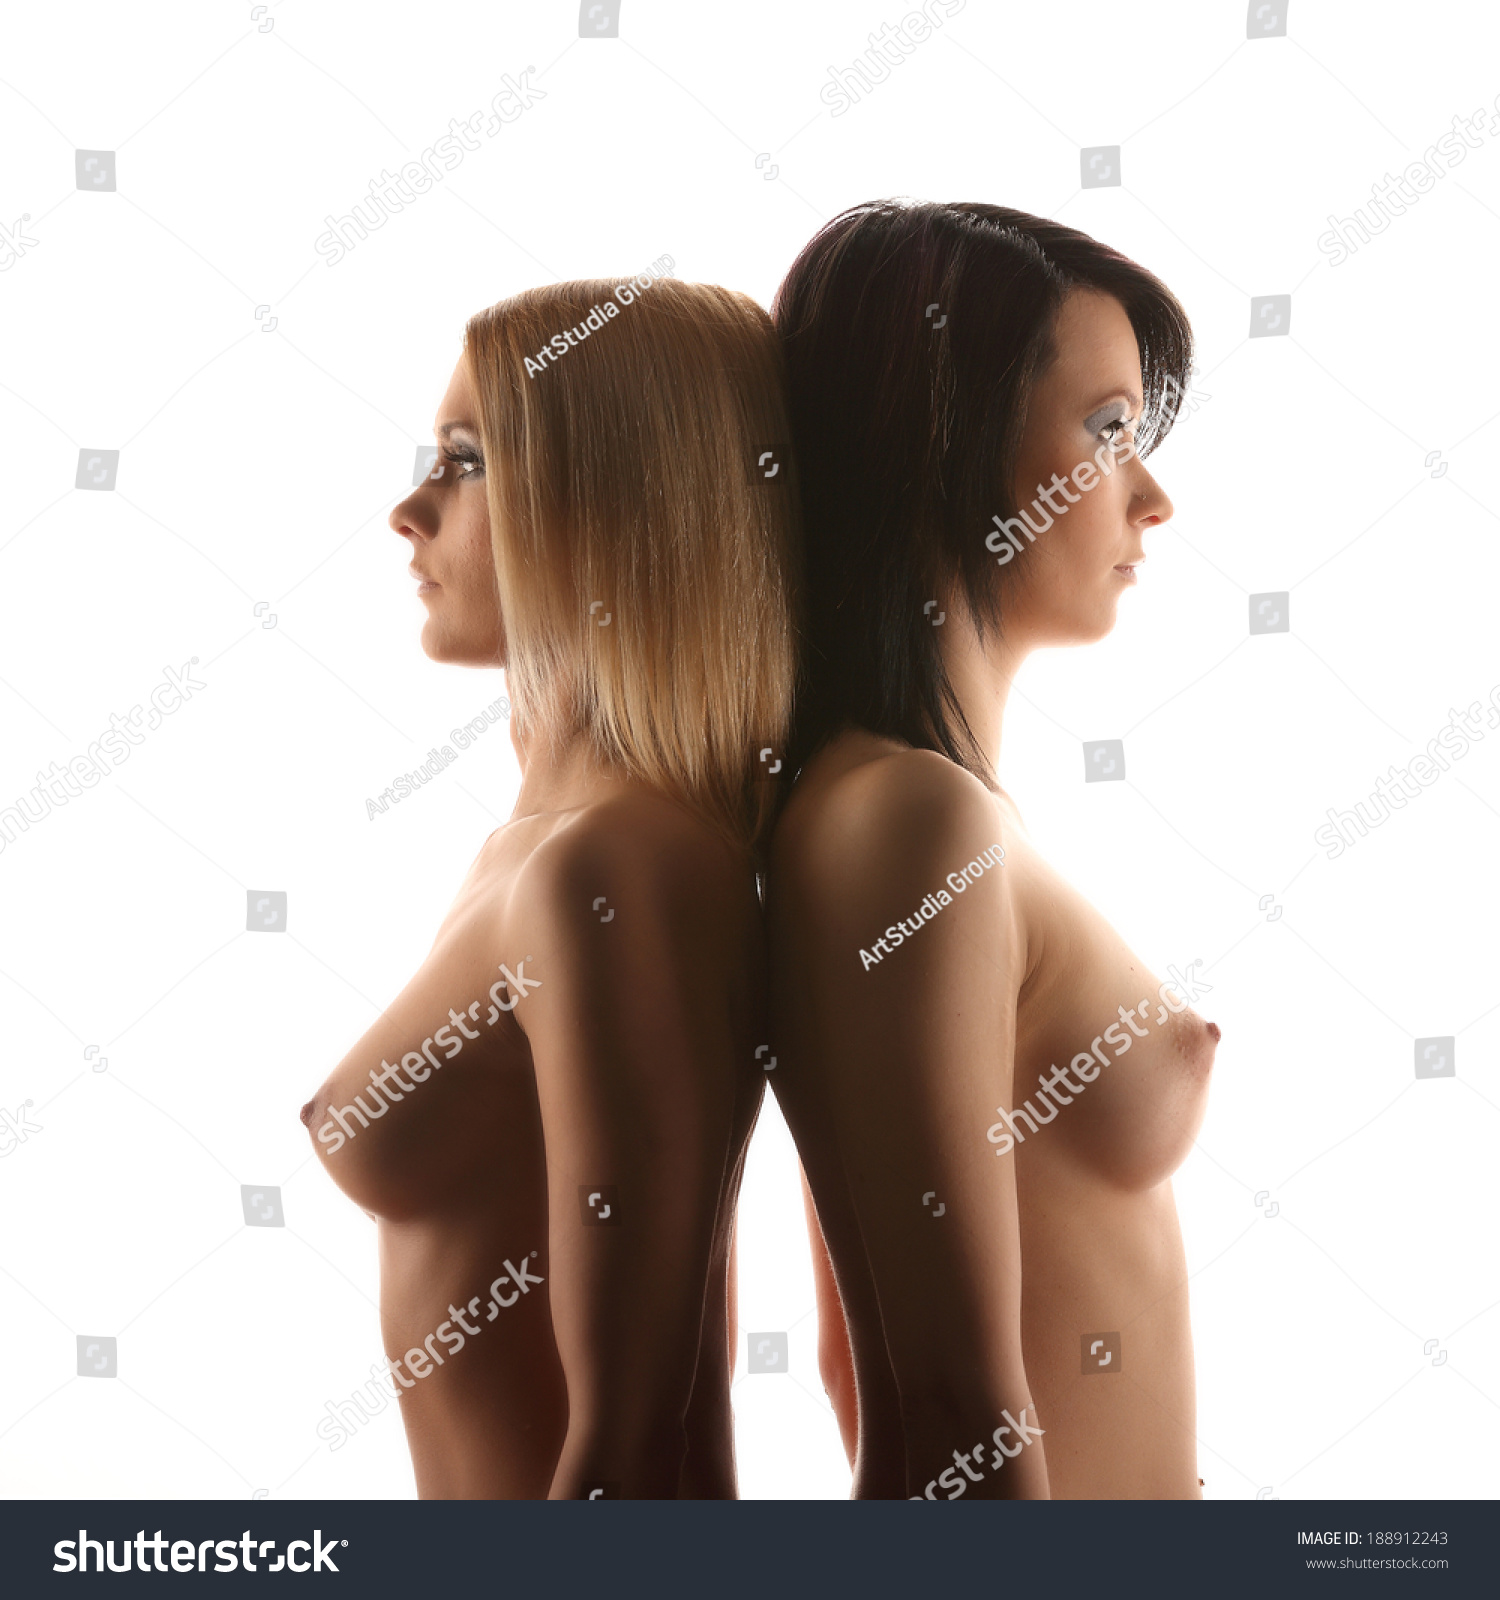 Two Girls Posing Nude Together